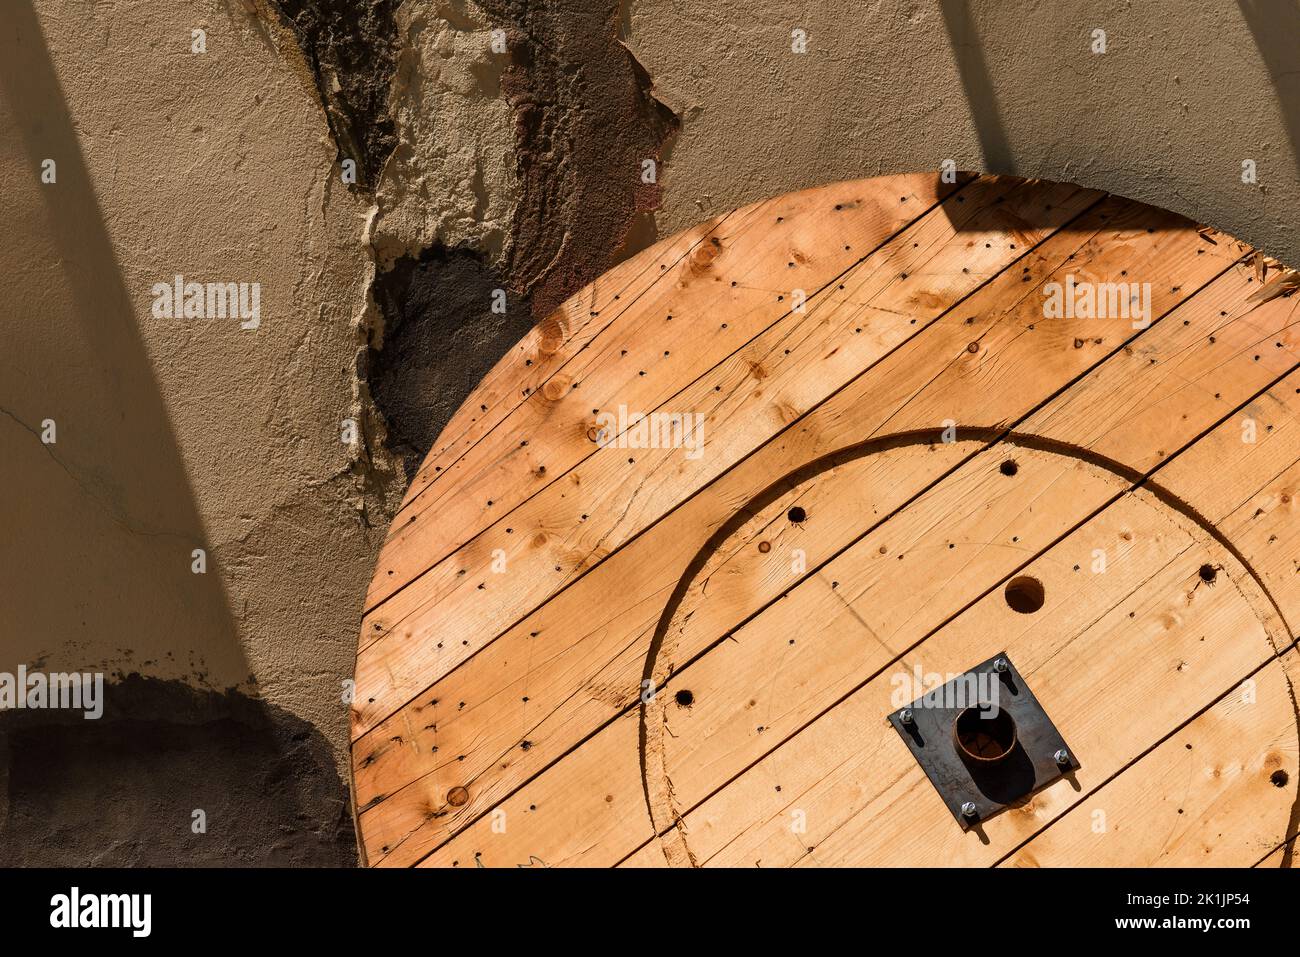 Part of wooden cable reel leaning on to abandoned industrial building in bad condition, copy space Stock Photo